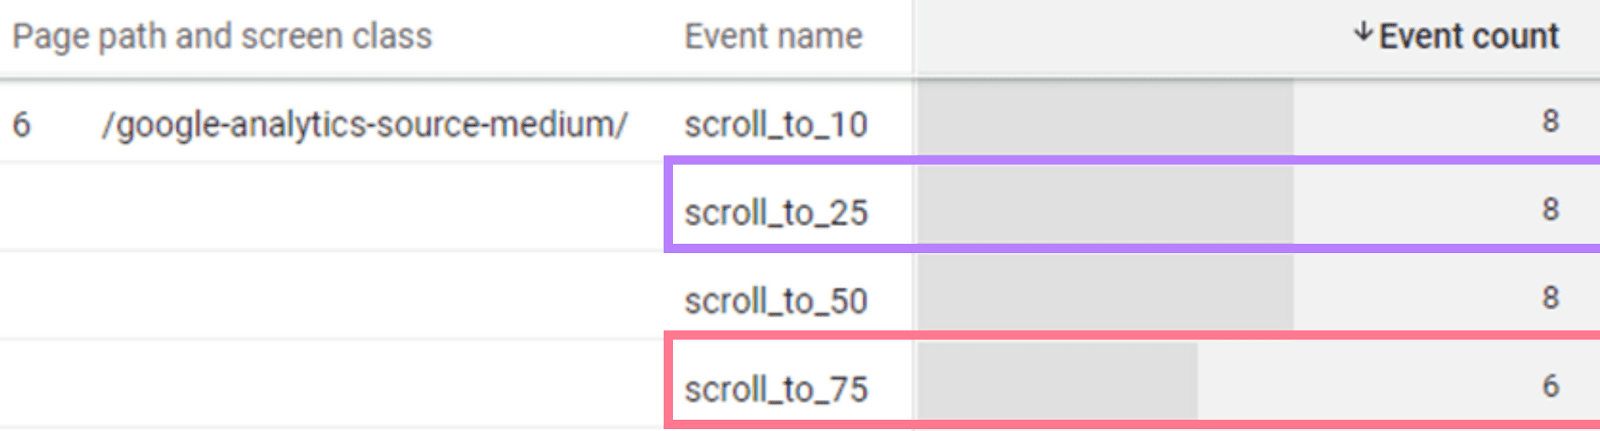 Event count shown in a table for scroll_to_25 events and scroll_to_75 events